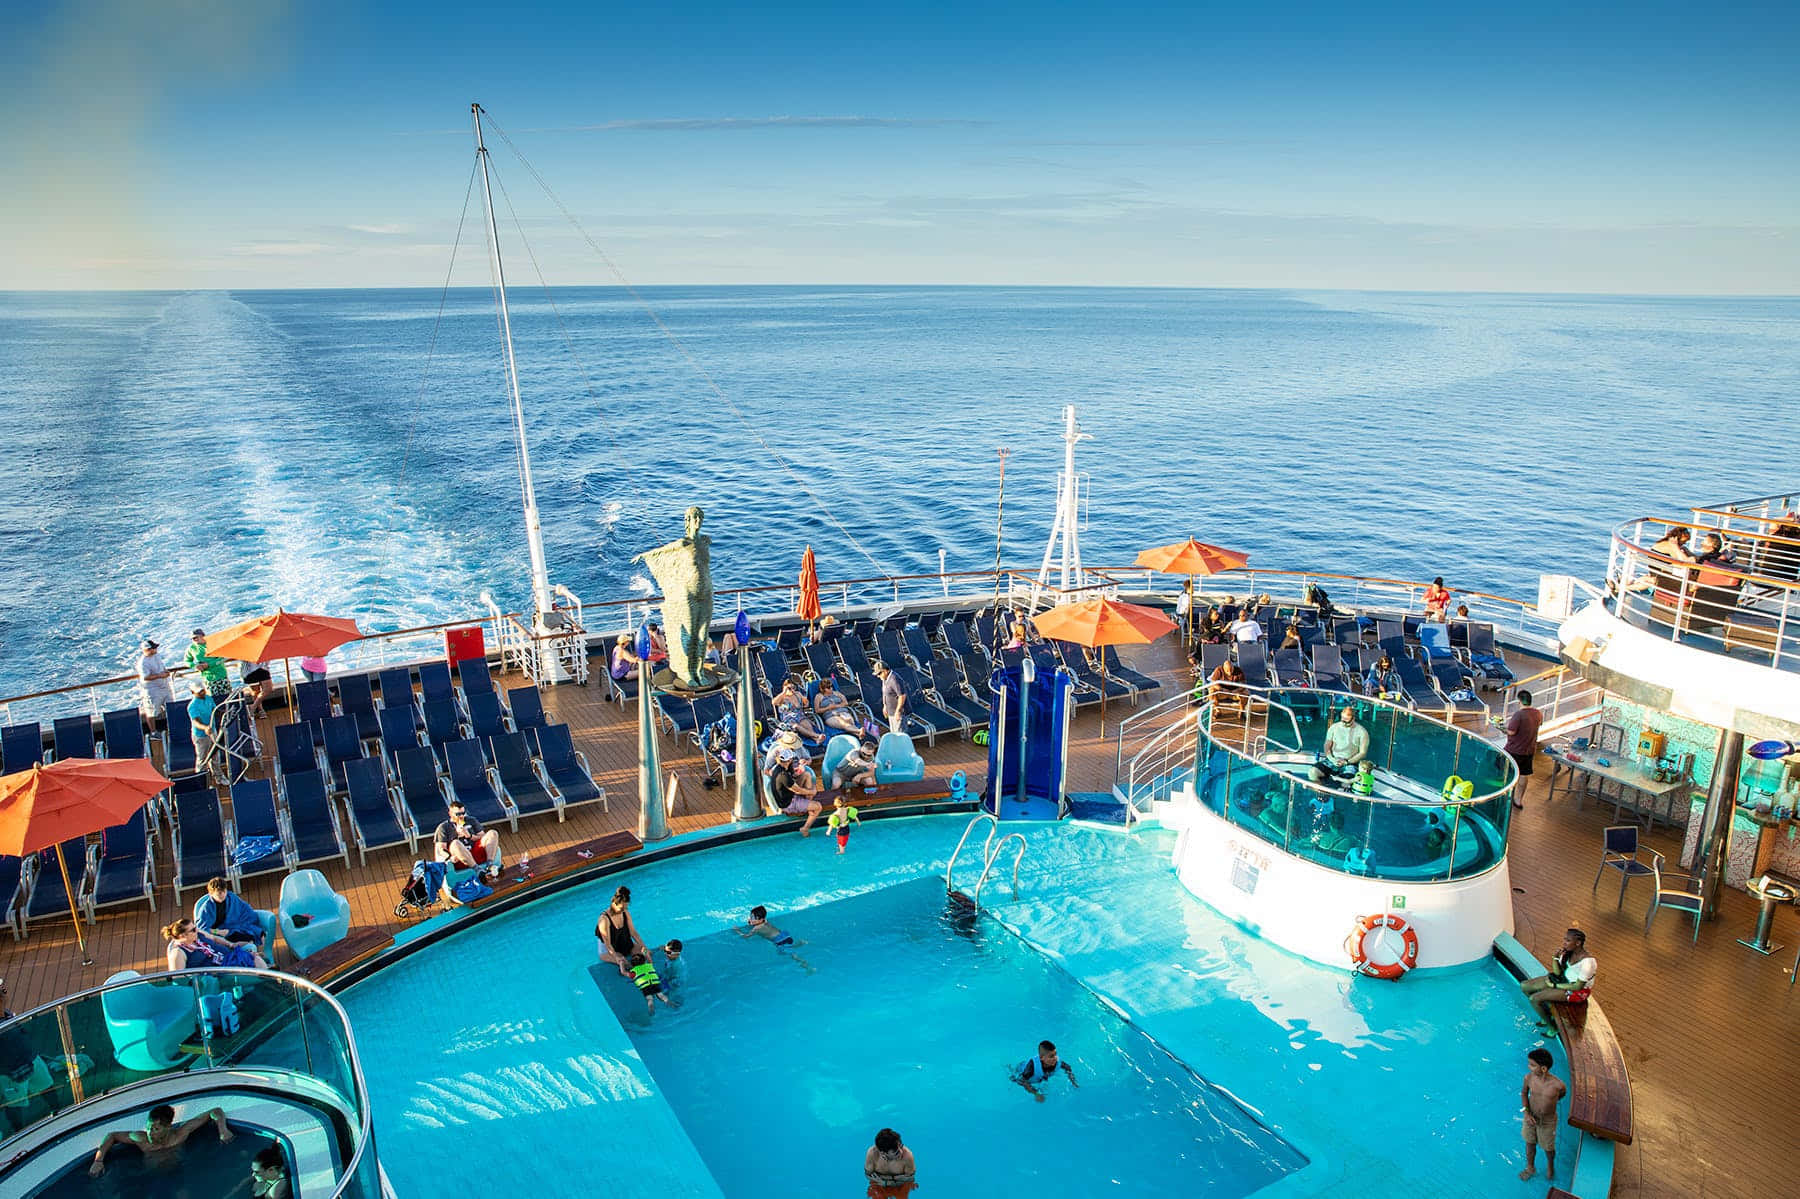 A Cruise Ship With A Pool And People In It